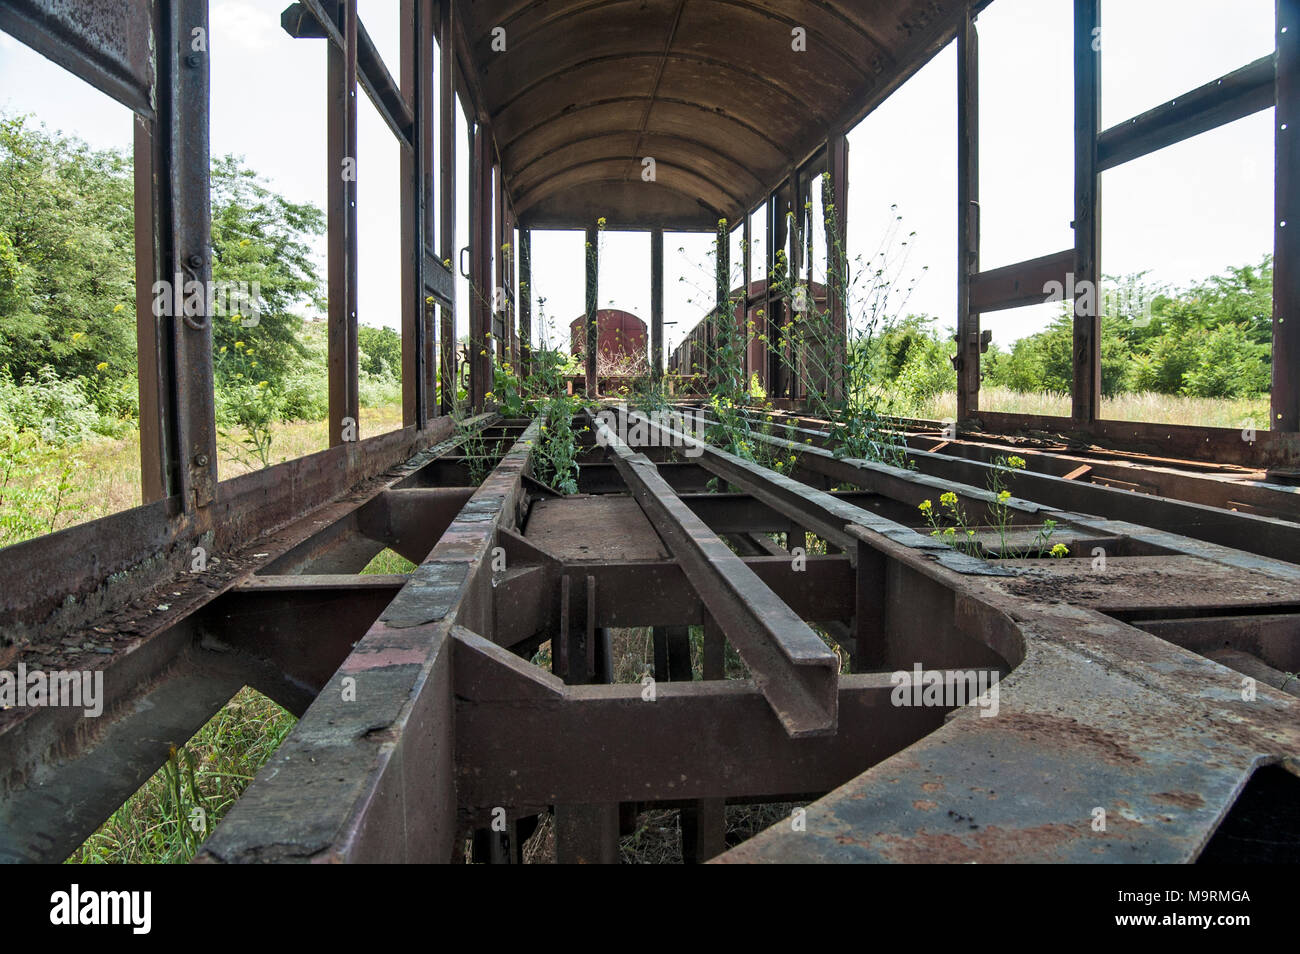 Old devastated railway wagon on the railway track in the weeds, bushes and grass. Stock Photo